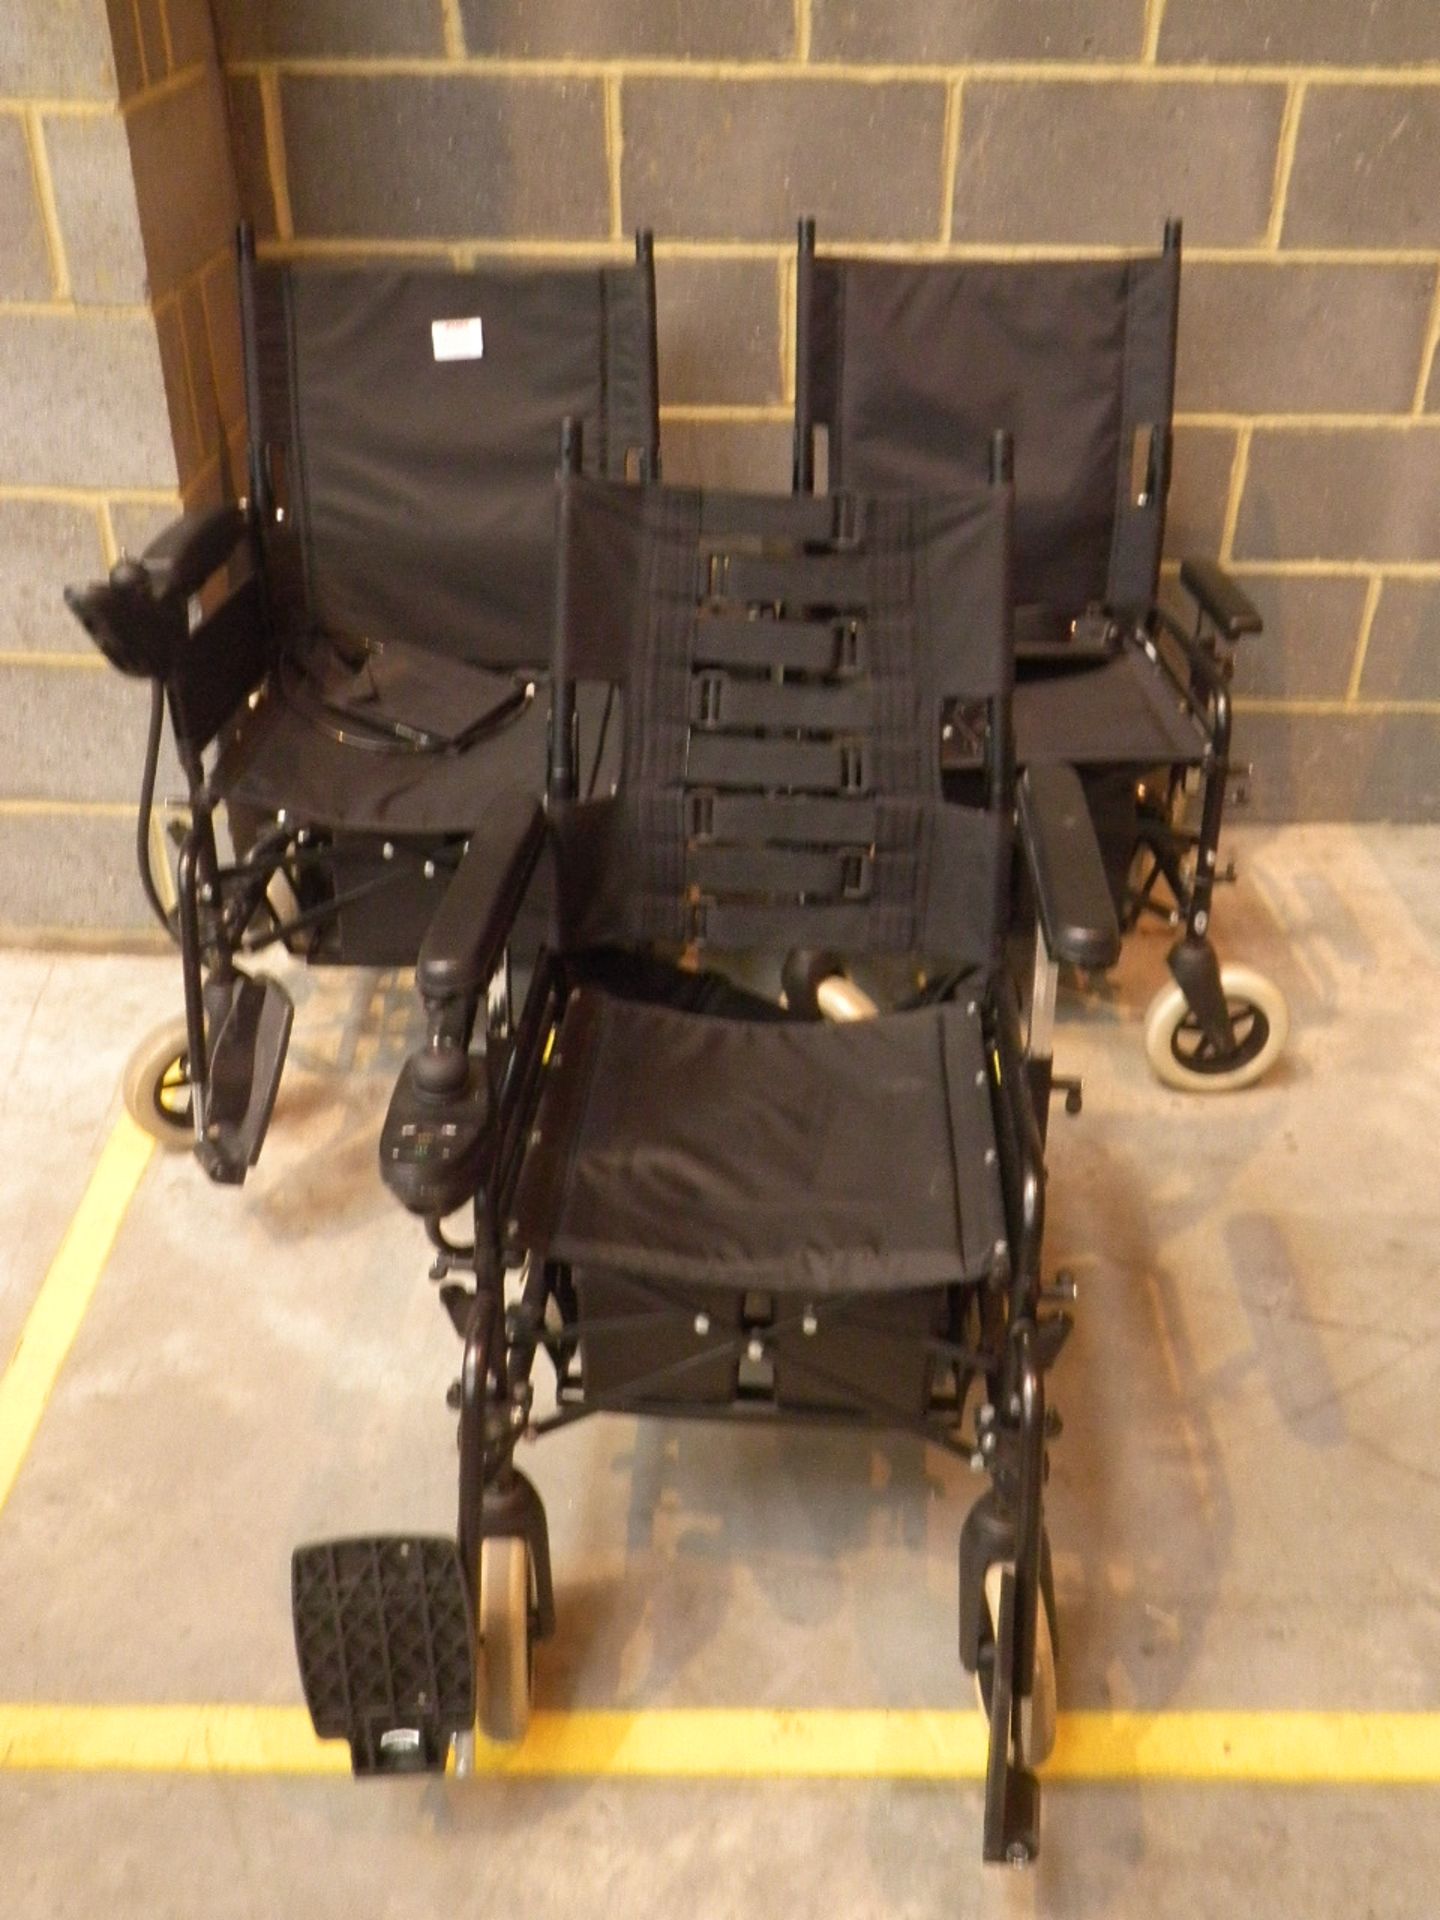 2x Invacare Apollo Electric Motorised Wheelchair With Footpedals And 1x Unknown Maker Electric